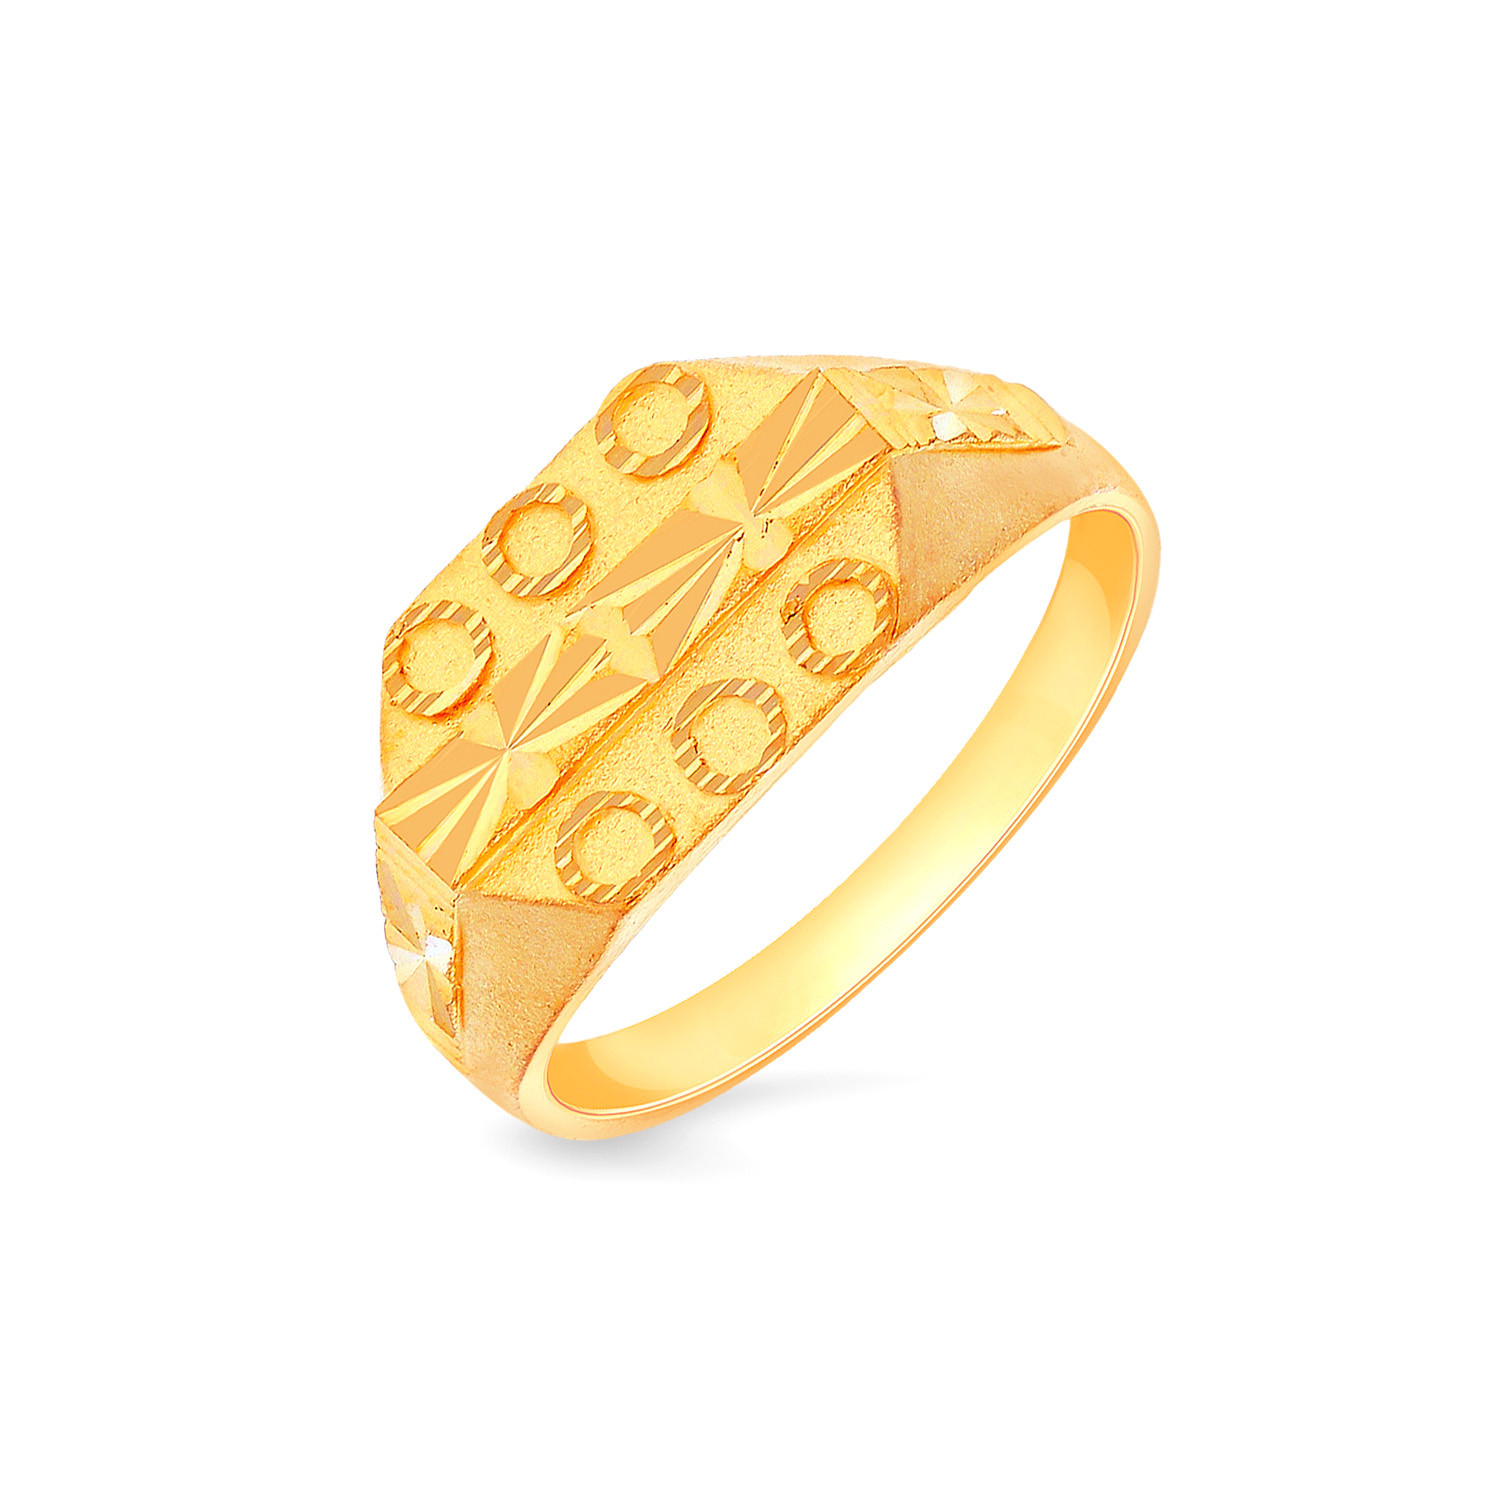 Buy MALABAR GOLD AND DIAMONDS Womens Gold Ring SKYFRDZ013 Size 12 |  Shoppers Stop